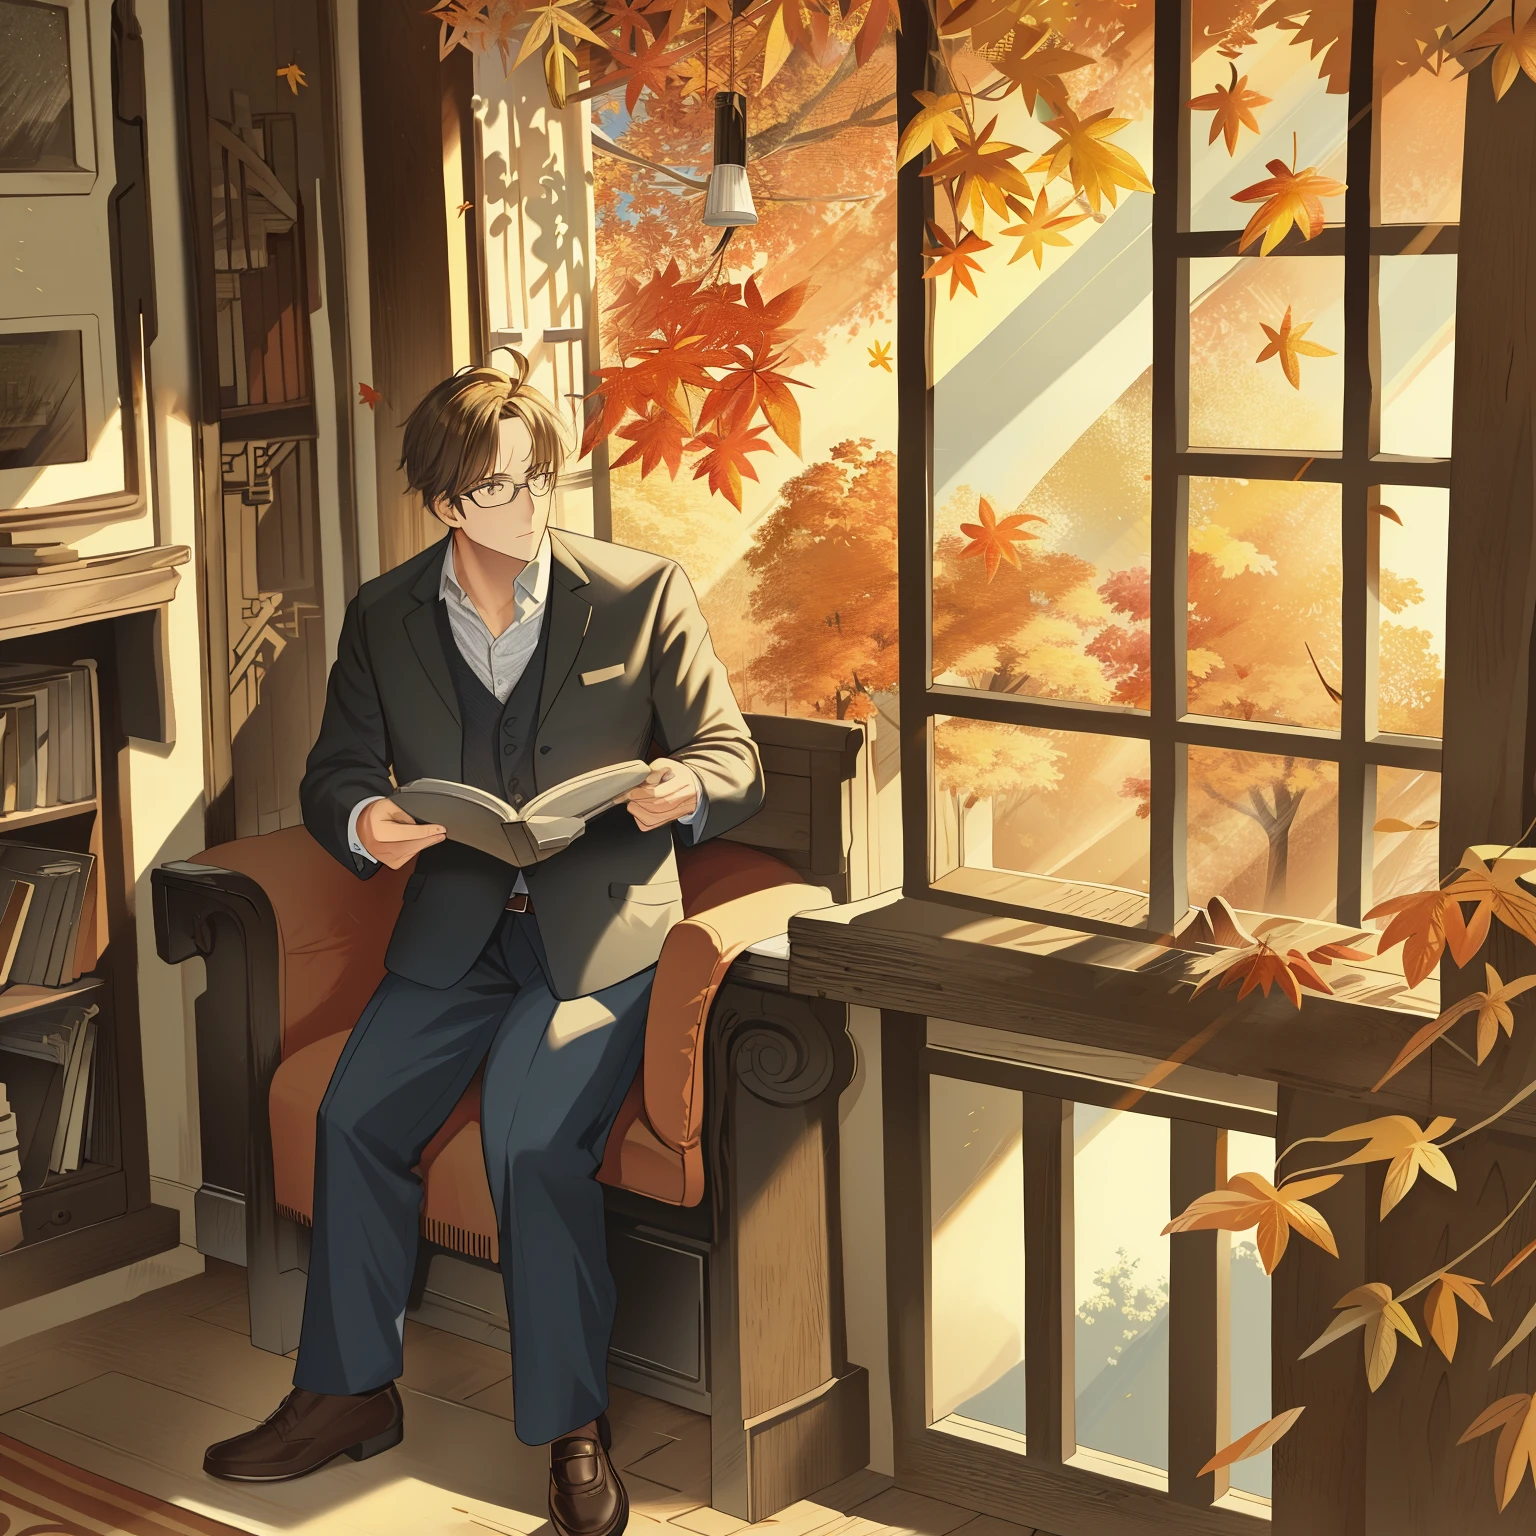 Rdg & Wrtg, solo, introspective reader, detailed expression, quaint study, vintage books, stacked high, sunbeams streaming in, autumn leaves outside, cozy room, autumn colors, wearisome yet content face, deep in thought, glasses perched on nose, distinguished gentleman, checkered shirt, pants with a subtle whisker texture, well-worn leather shoes, detailed environmental background, leafy trees outside, warm orange and yellow hues, saturated colors, reflective lighting, cinematic scene, best quality illustration.